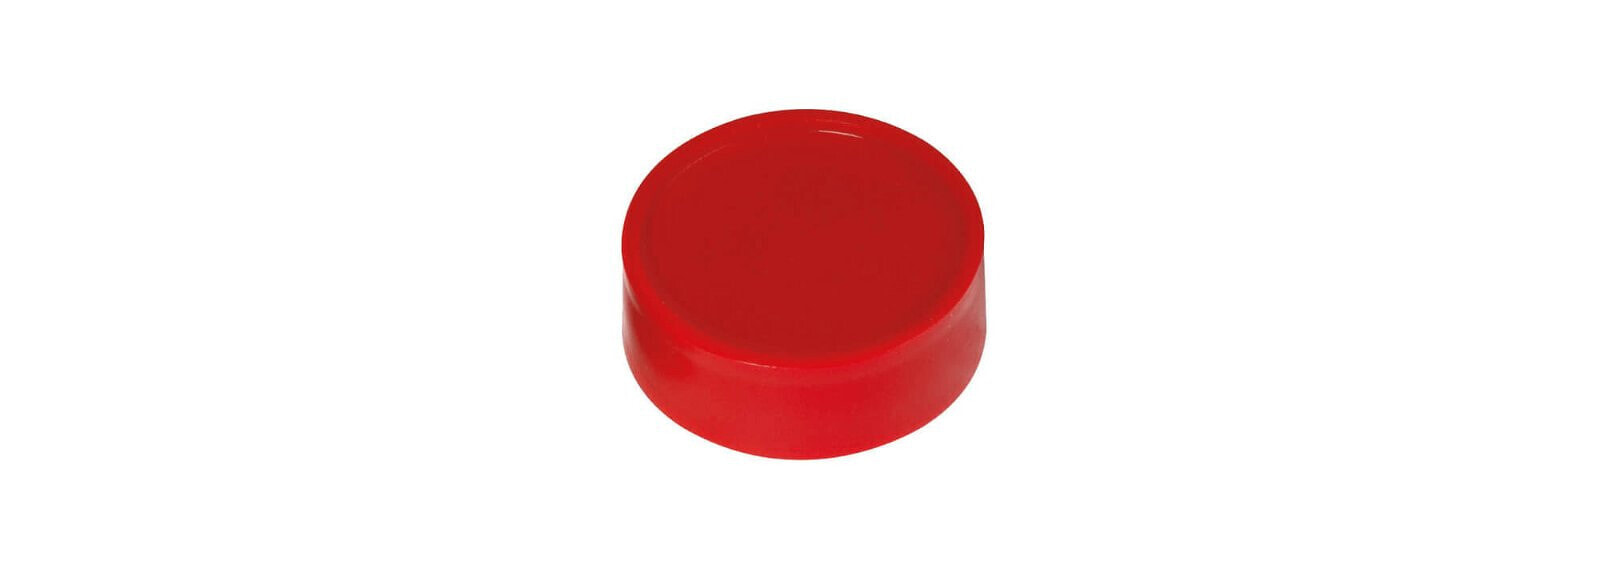 MAUL 6173325 - Round - Red - 3.4 cm - 2 kg - 10 pc(s)